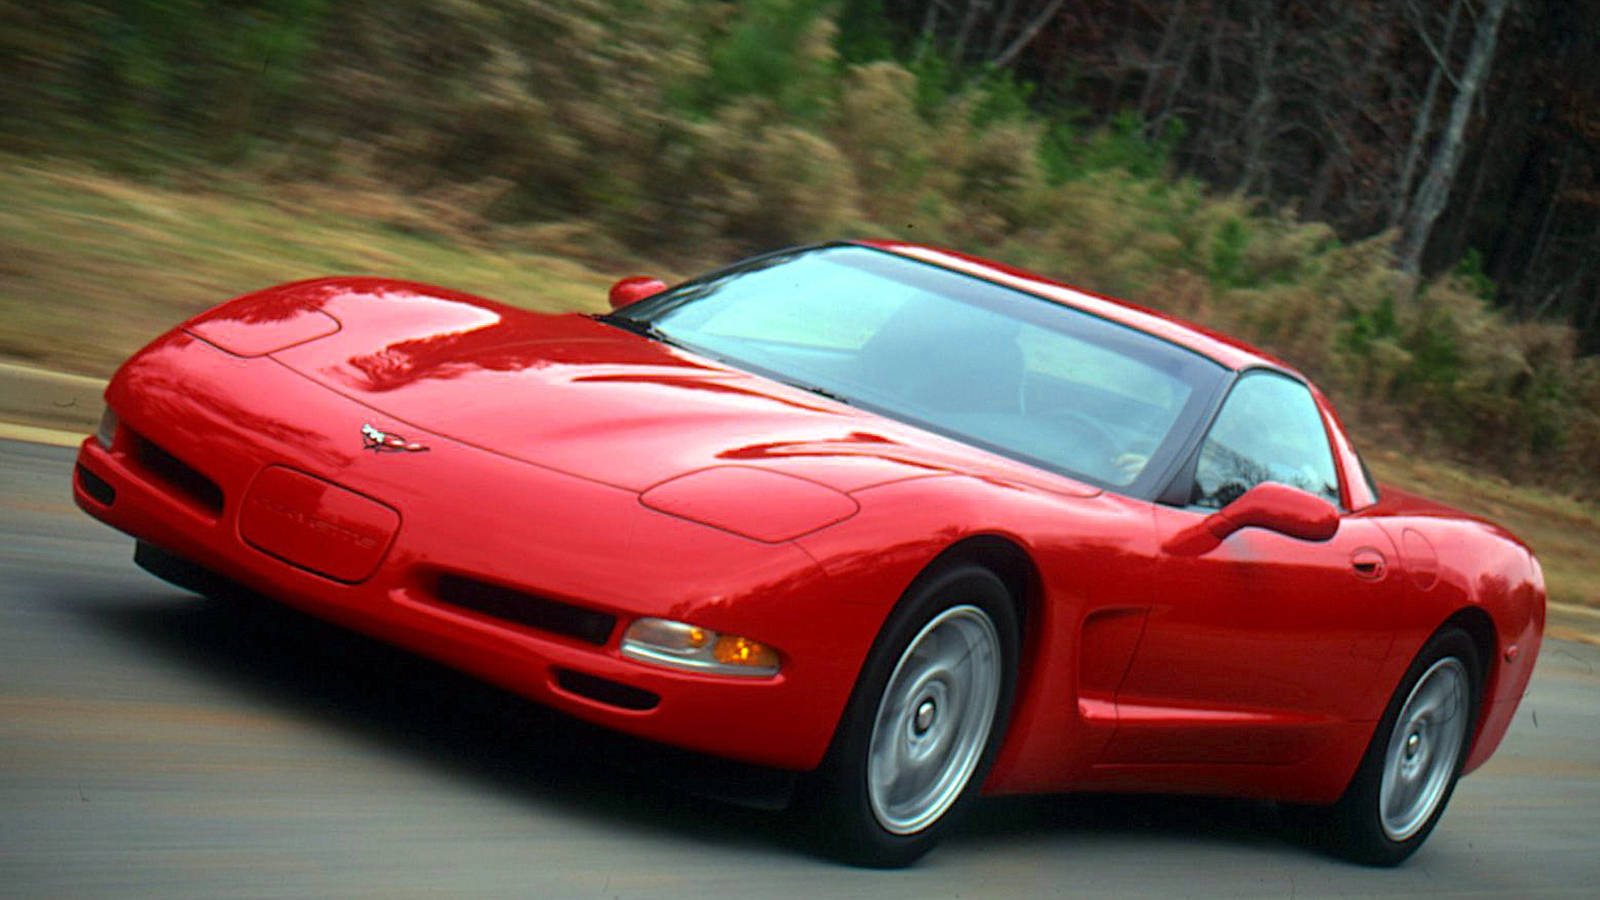 10 best cars from 1990s